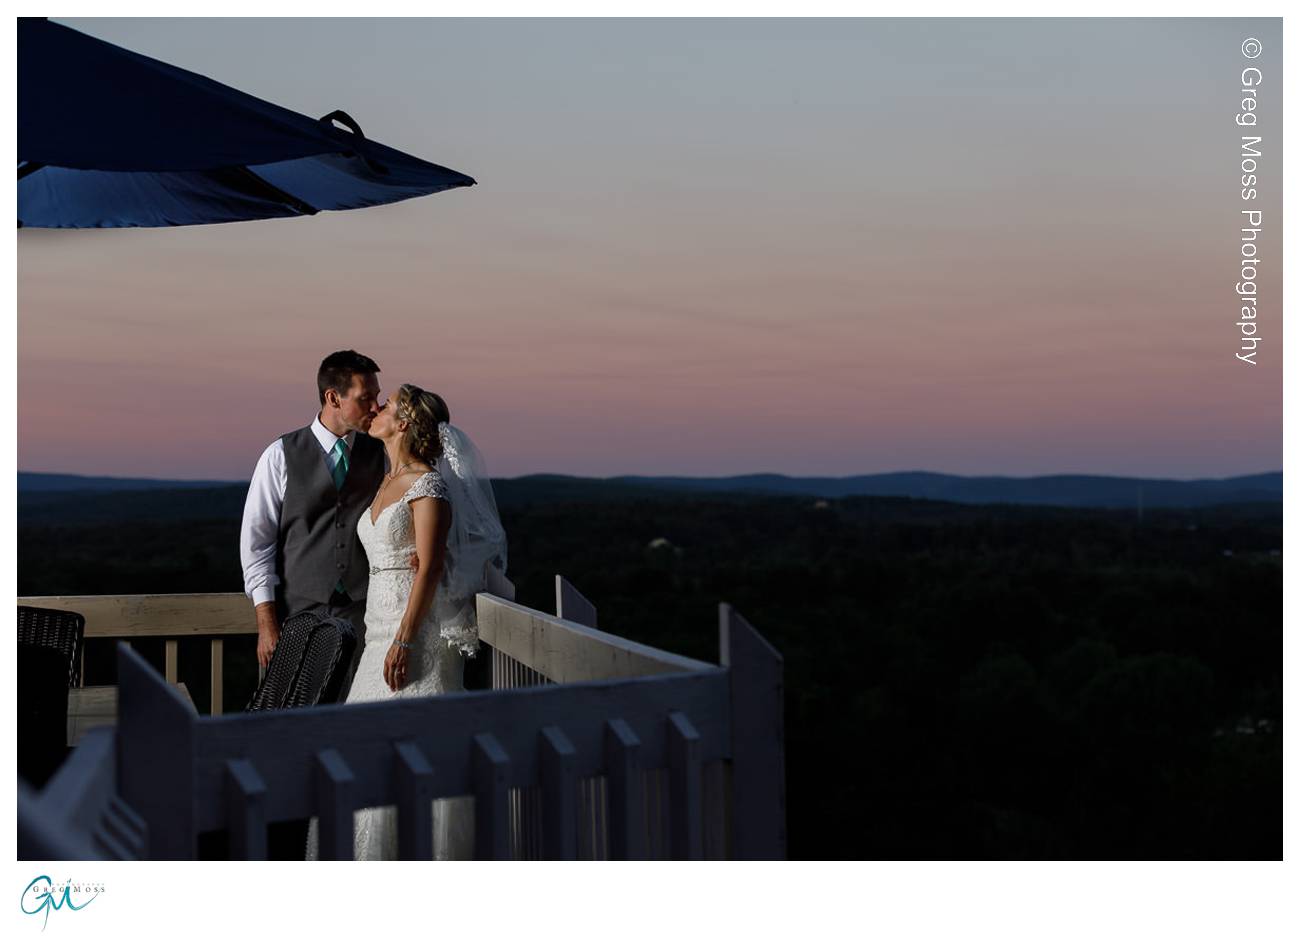 Bride and Groom on Mountain Rose Inn Deck at sunset